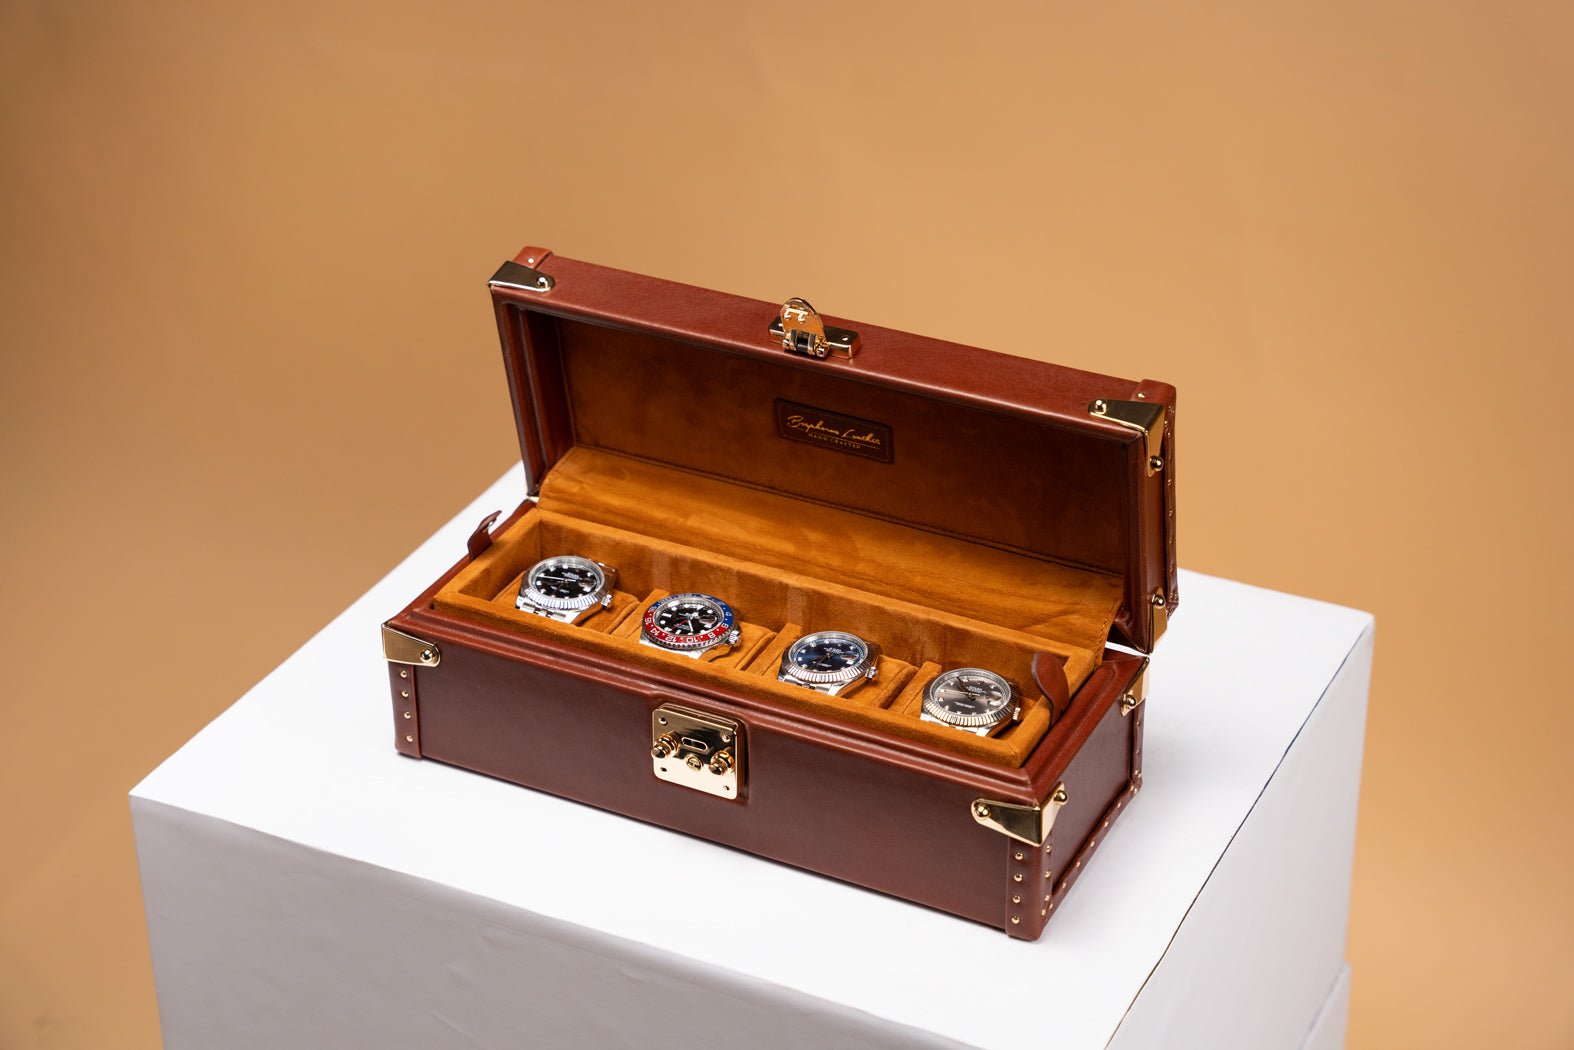 Bosphorus LeatherPetra Watch Case - Montana 01 For 4 Watches